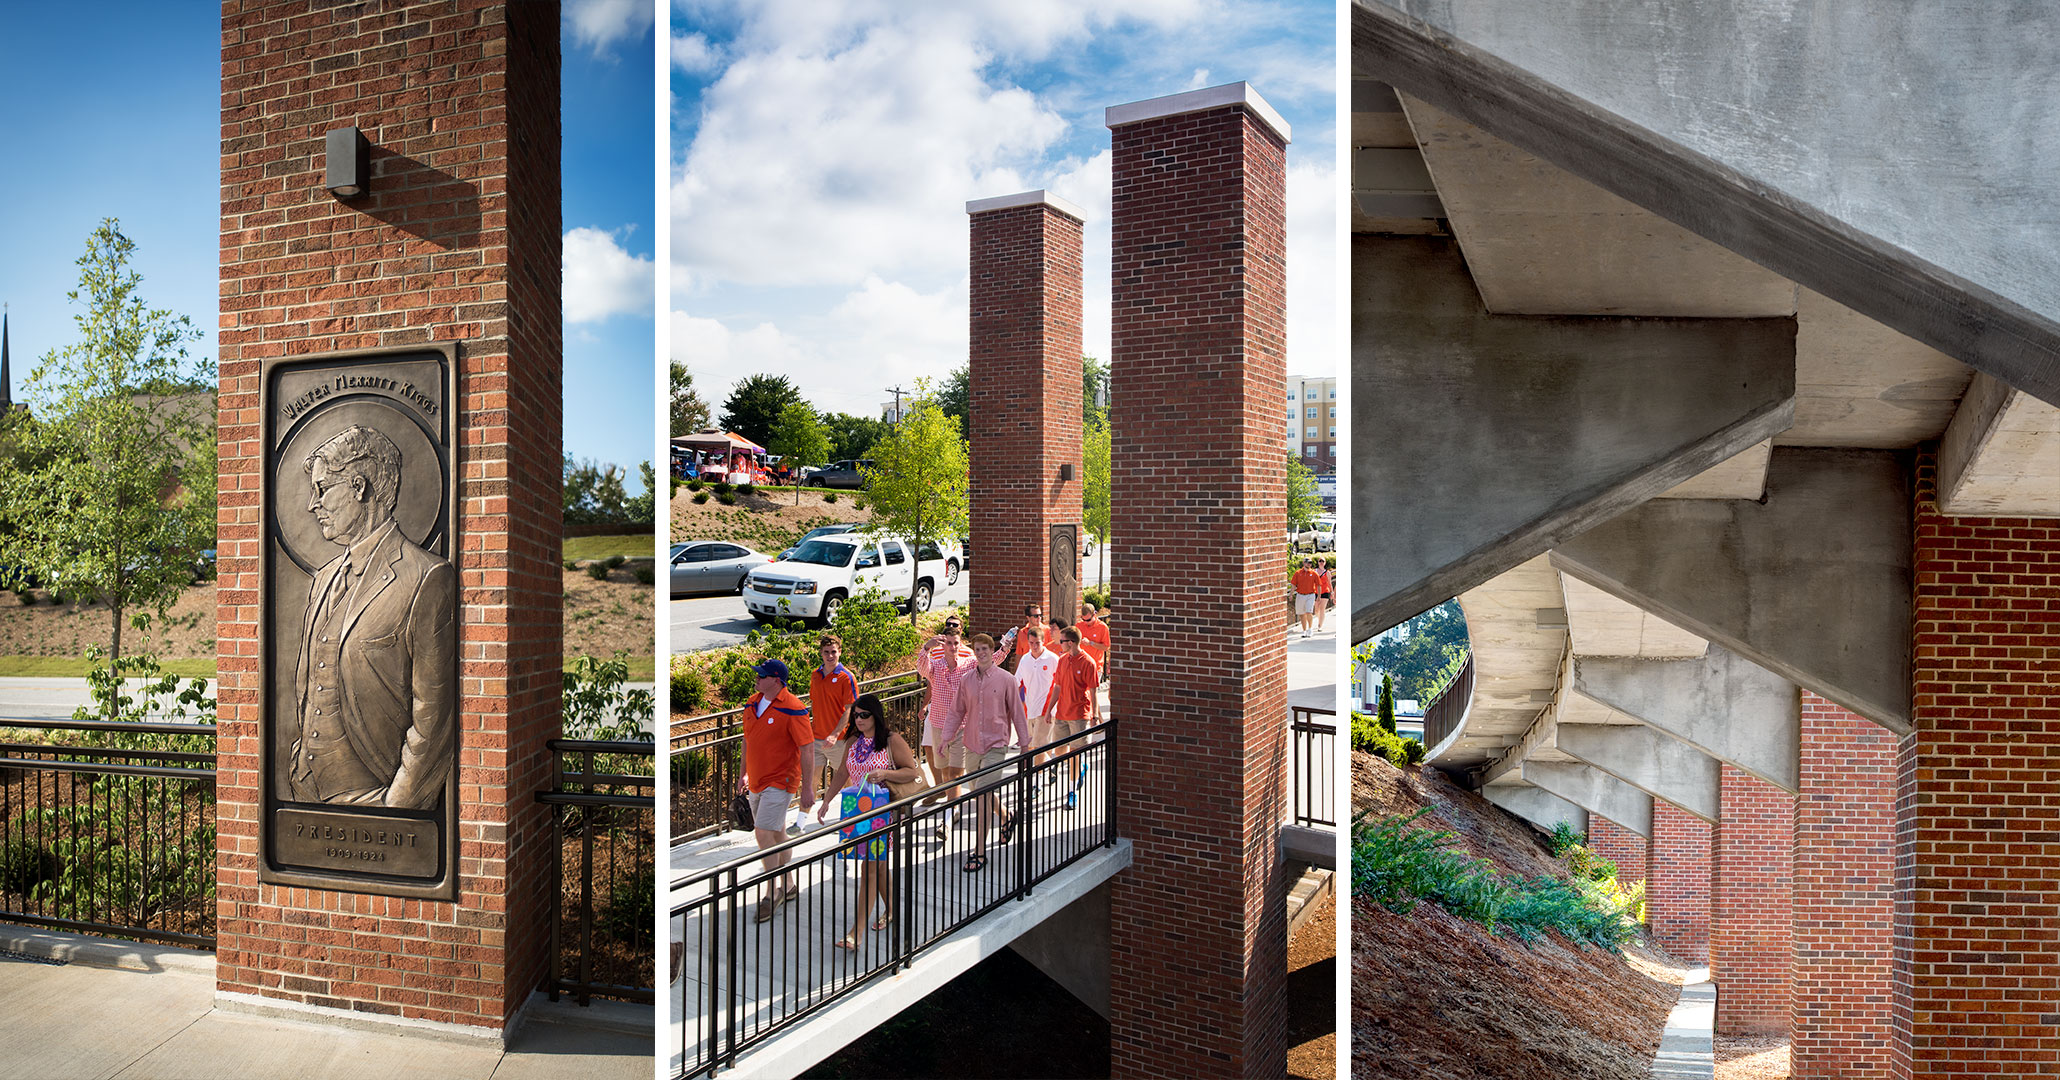 Clemson University hired Boudreaux master planners to improve campus safety with secure walkways to handle student traffic.